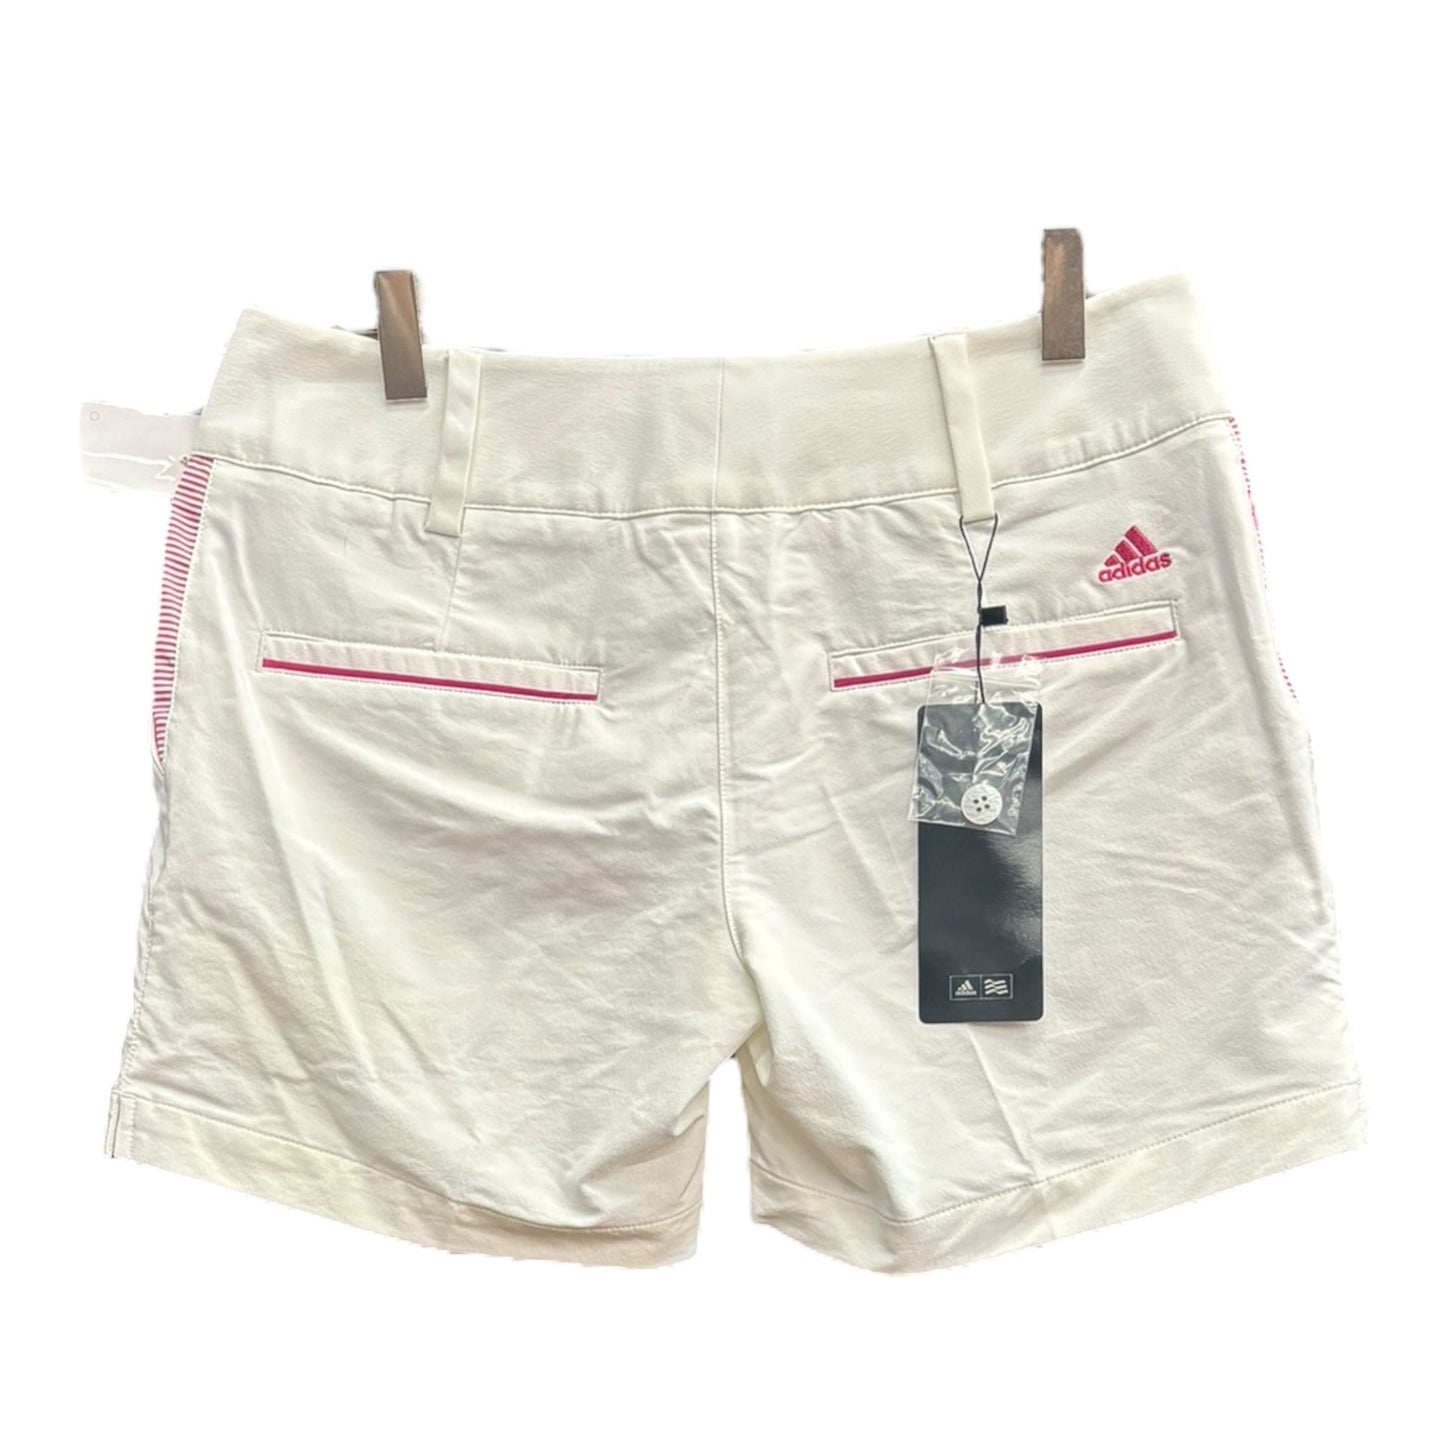 Shorts By Adidas  Size: 2